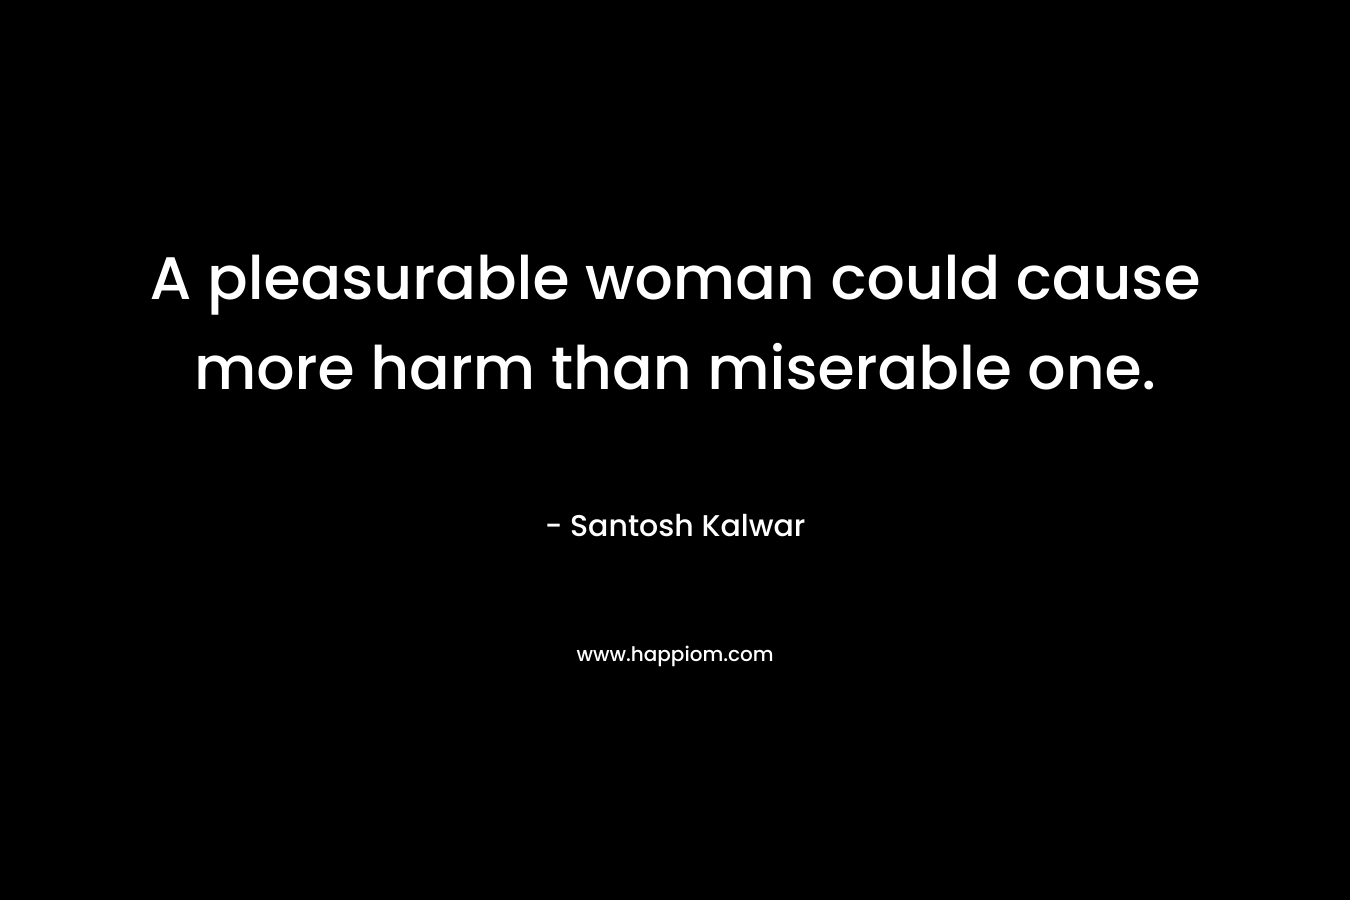 A pleasurable woman could cause more harm than miserable one.